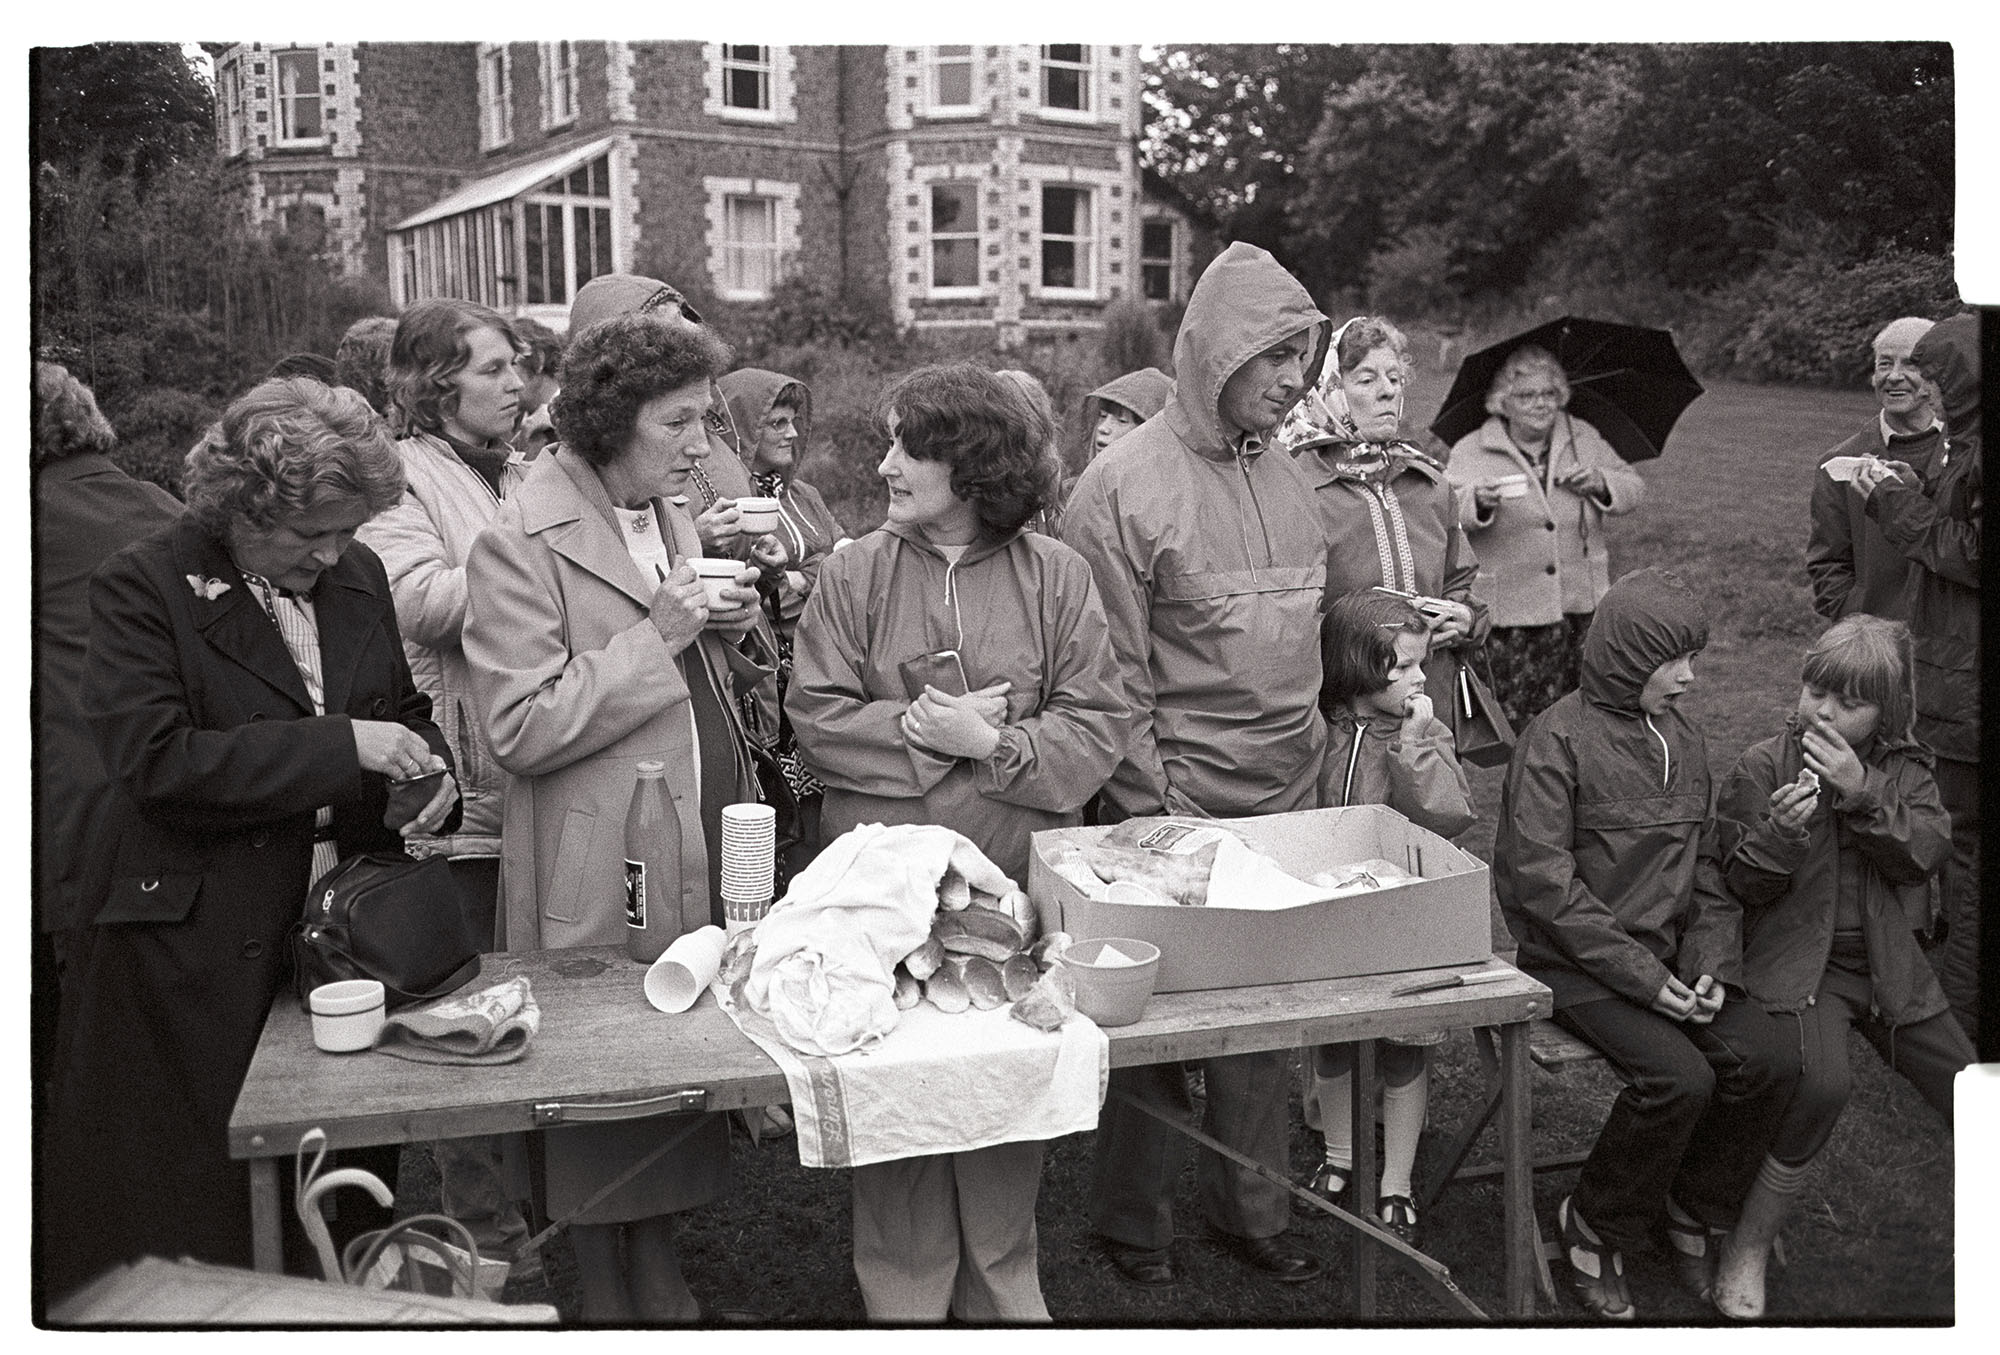 Baptist Garden Party in rain barbeque, hot dogs and tea. <br /> [A group of people in coats, anoraks and with umbrellas, standing in the garden by a table of hot dogs and drinking tea at the Baptist Church garden party at Barlands, Dolton. A large house is in the background.]